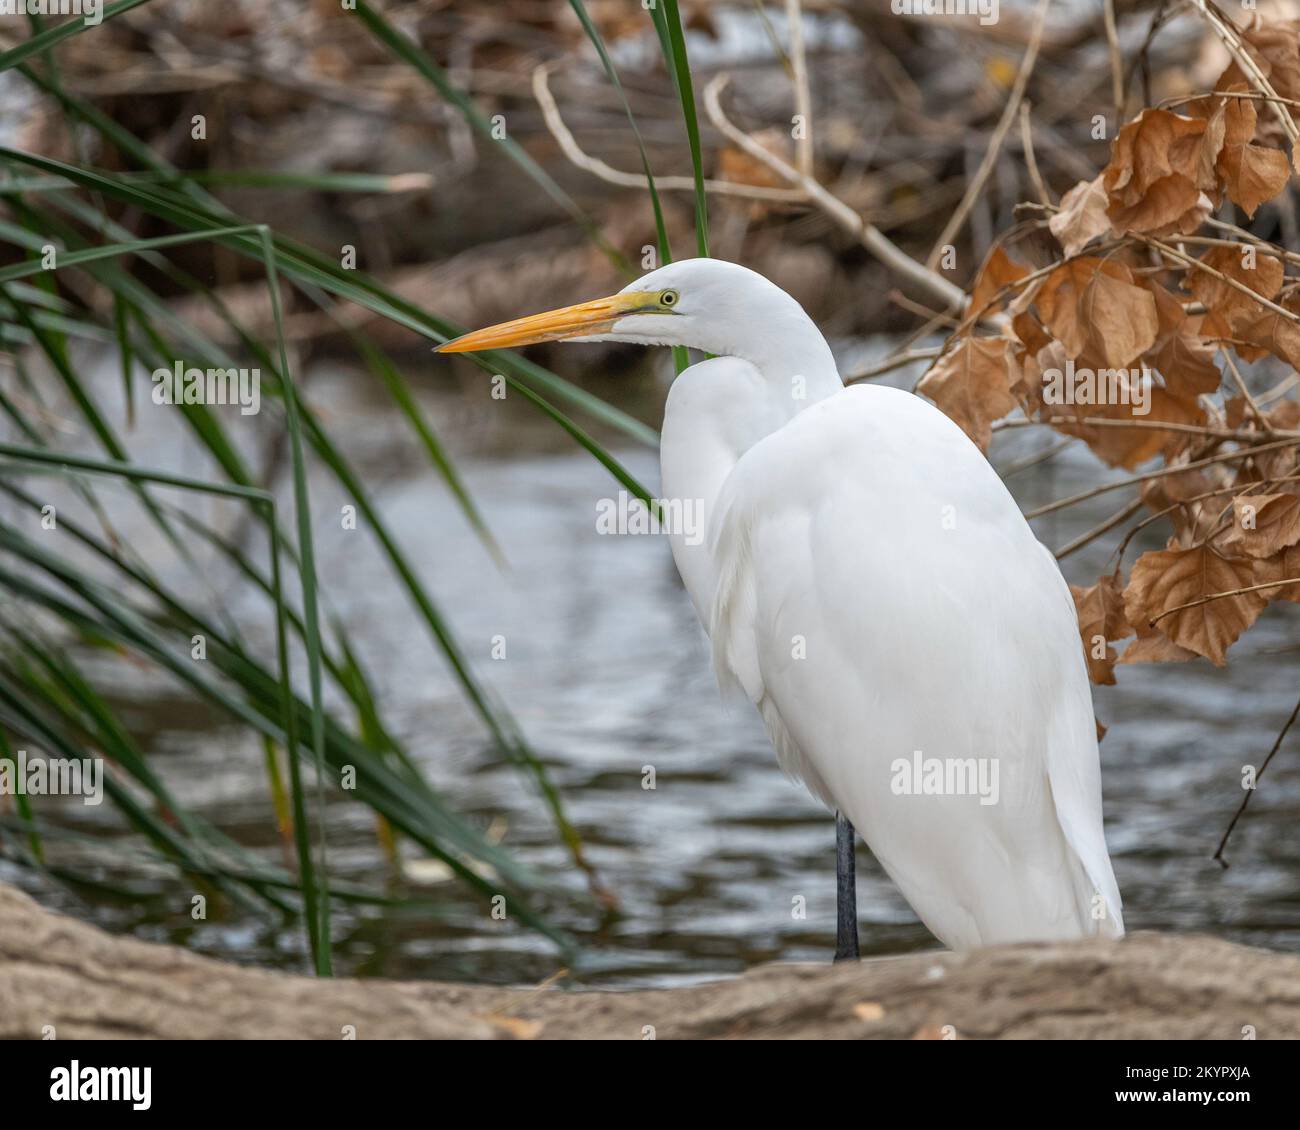 A Great Egret (Ardea alba) searches for food at the Sepulveda Basin Wildlife  Reserve in Van Nuys, CA. Stock Photo